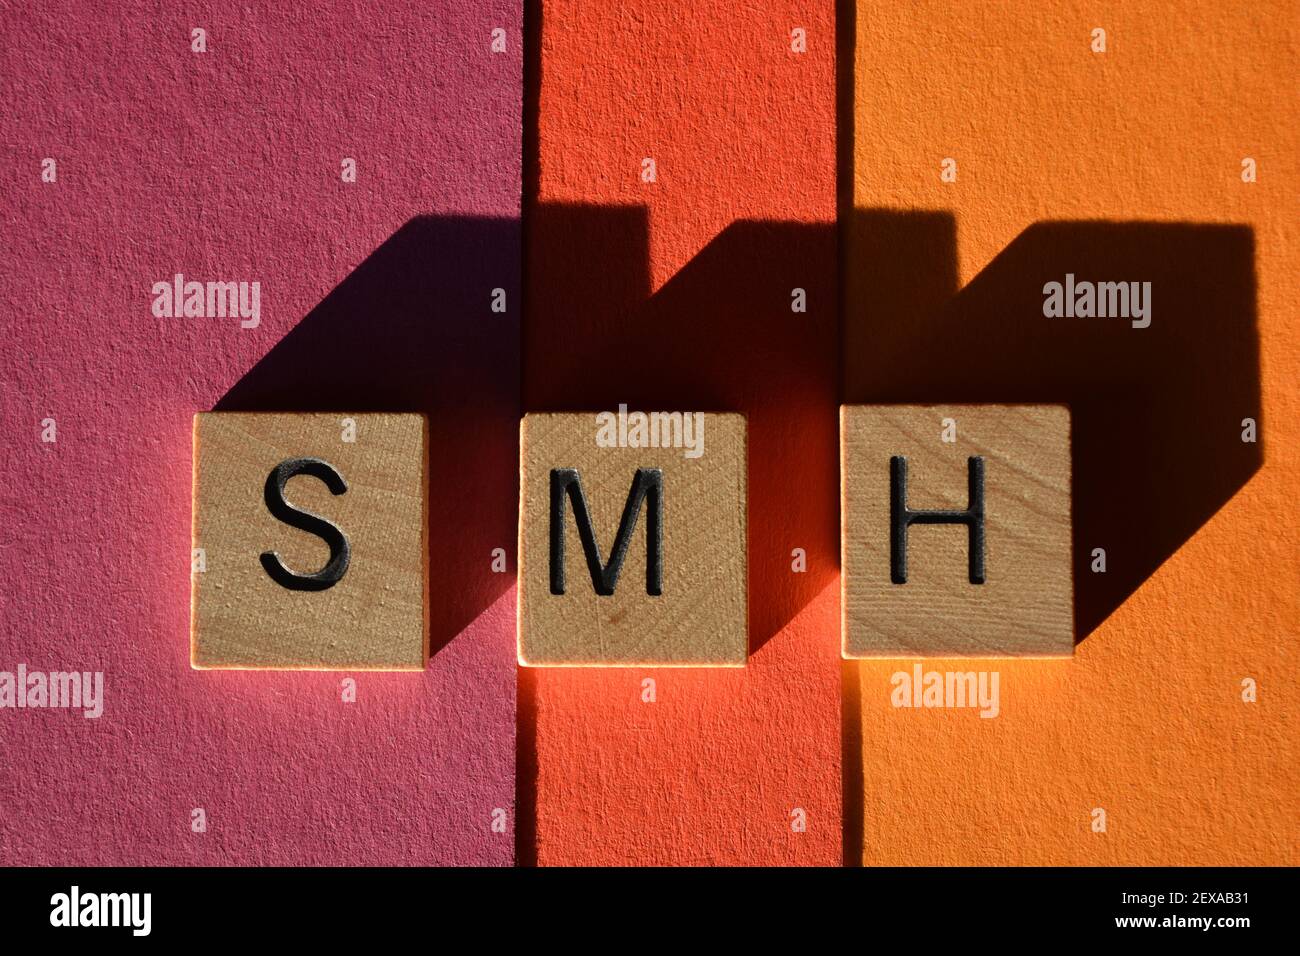 Internet Slang Acronyms Brb Be Right Stock Photo 1414053464